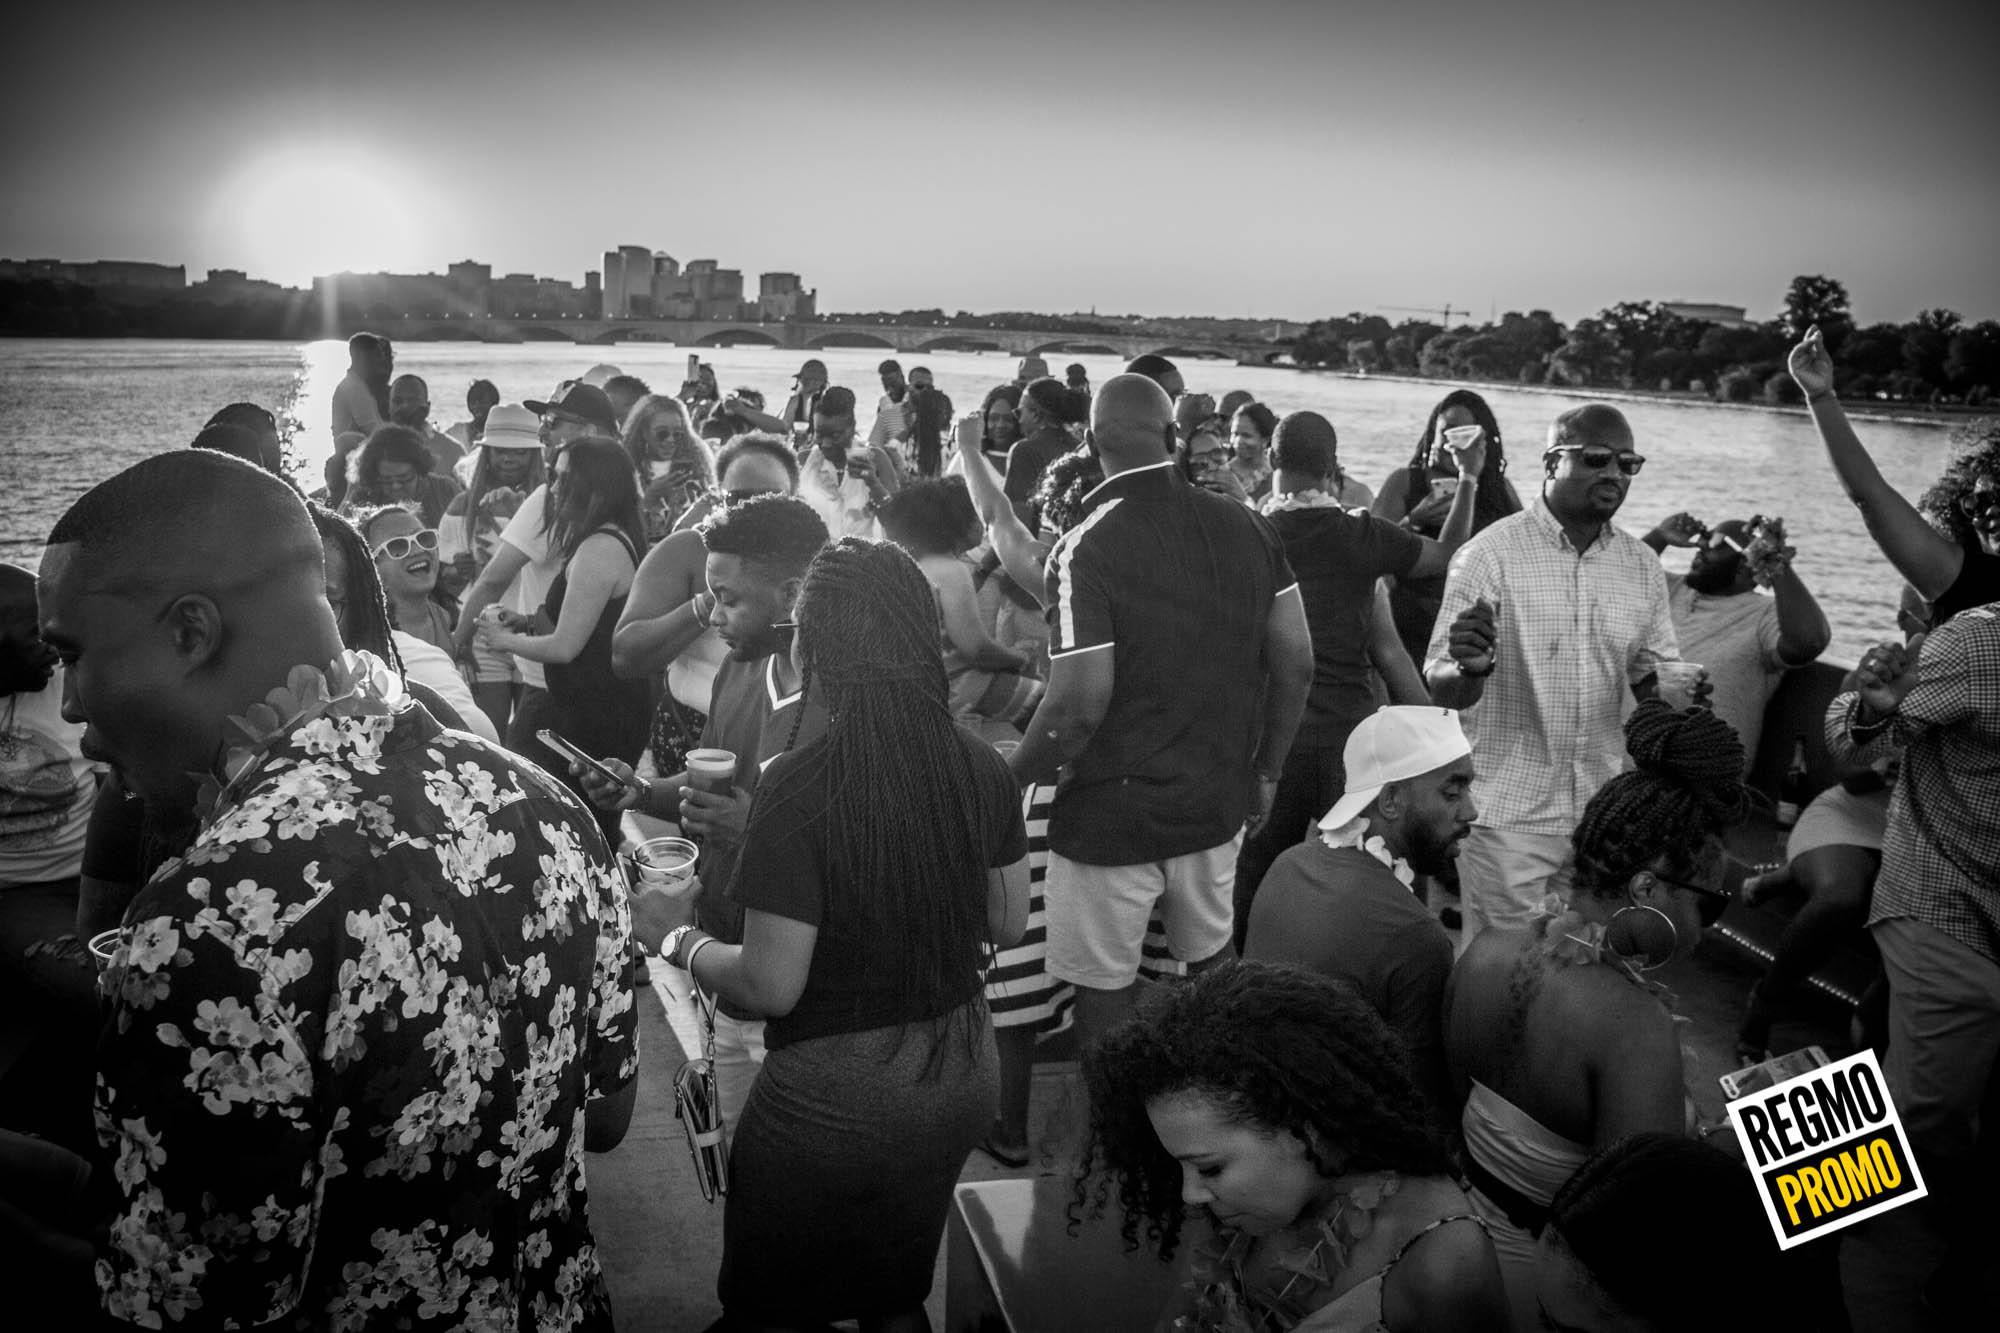 THE 90'S HIP HOP | R&B BOAT PARTY - 5.31.20 Sunset Cruise